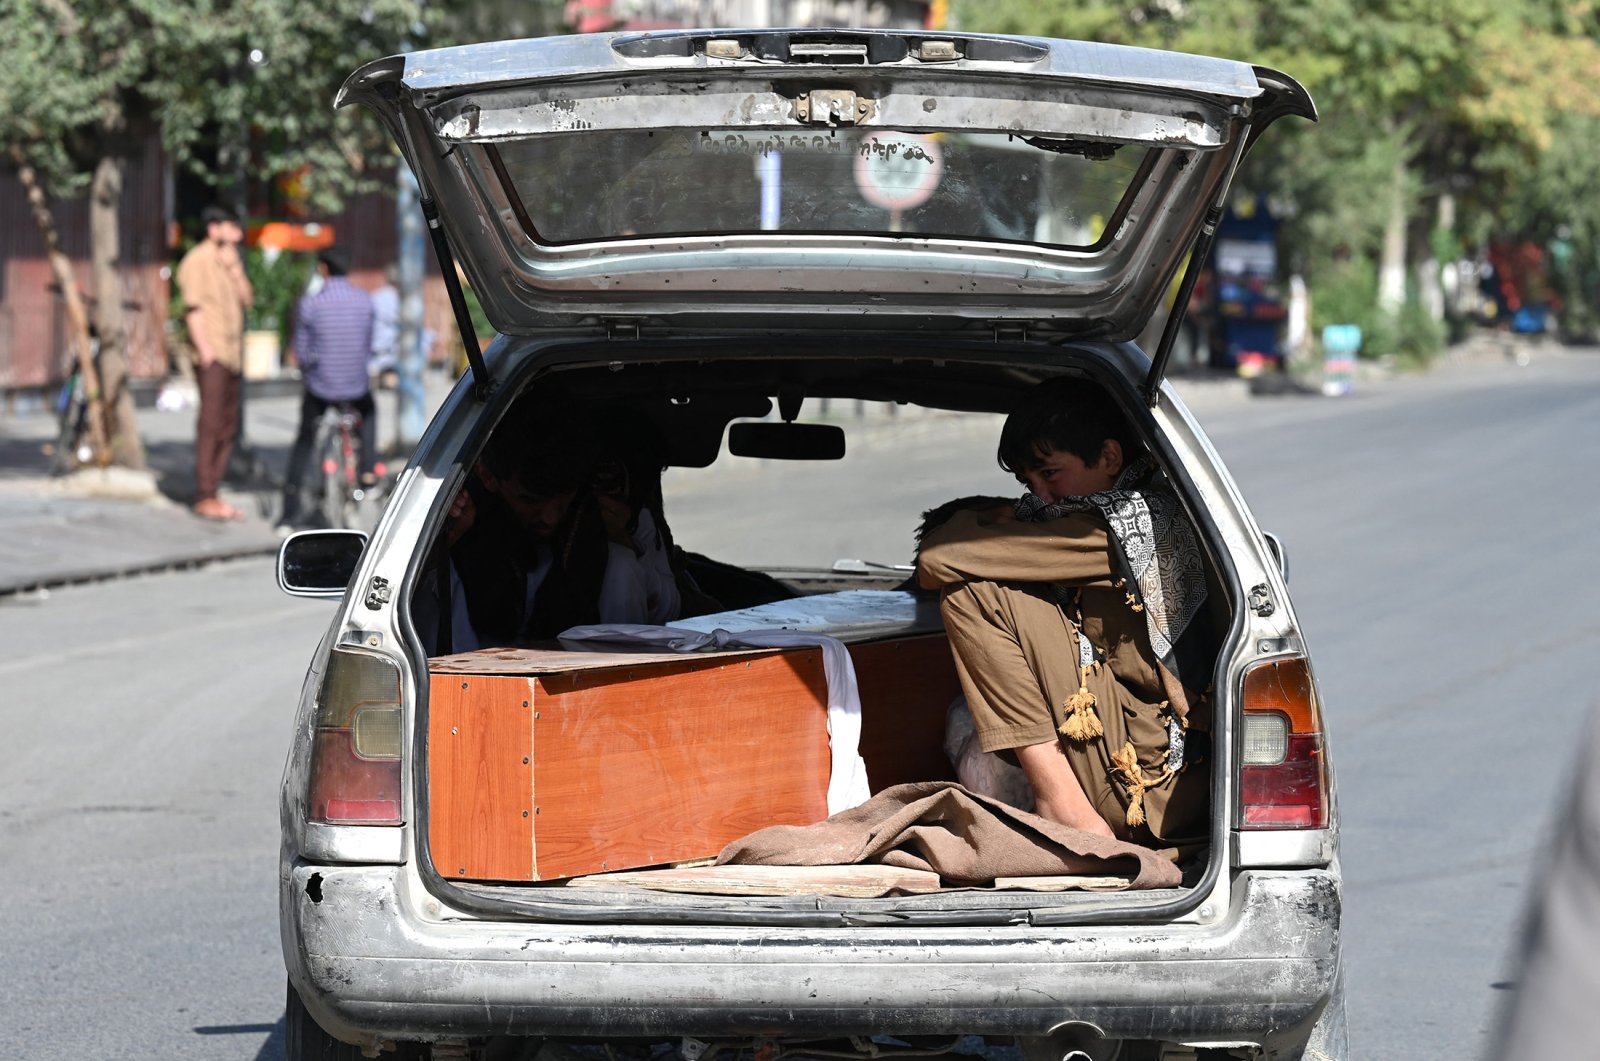 Relatives transport a coffin of a victim of the Aug. 26 twin suicide bombings outside Kabul Hamid Karzai International Airport, Kabul, Afghanistan, Aug. 27, 2021. (AFP Photo)